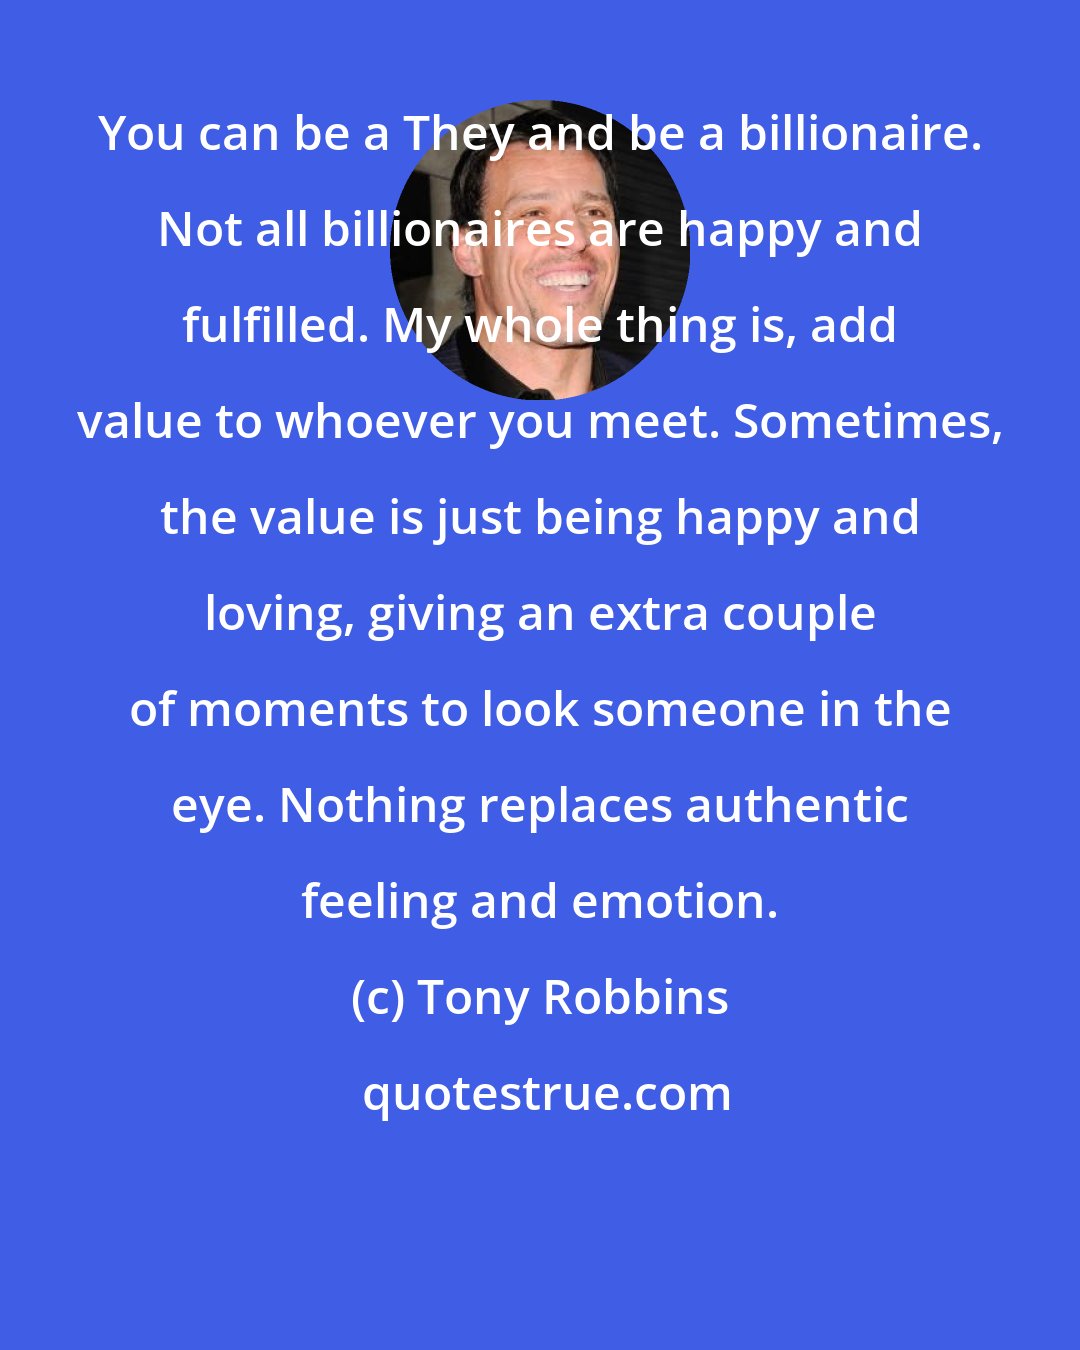 Tony Robbins: You can be a They and be a billionaire. Not all billionaires are happy and fulfilled. My whole thing is, add value to whoever you meet. Sometimes, the value is just being happy and loving, giving an extra couple of moments to look someone in the eye. Nothing replaces authentic feeling and emotion.